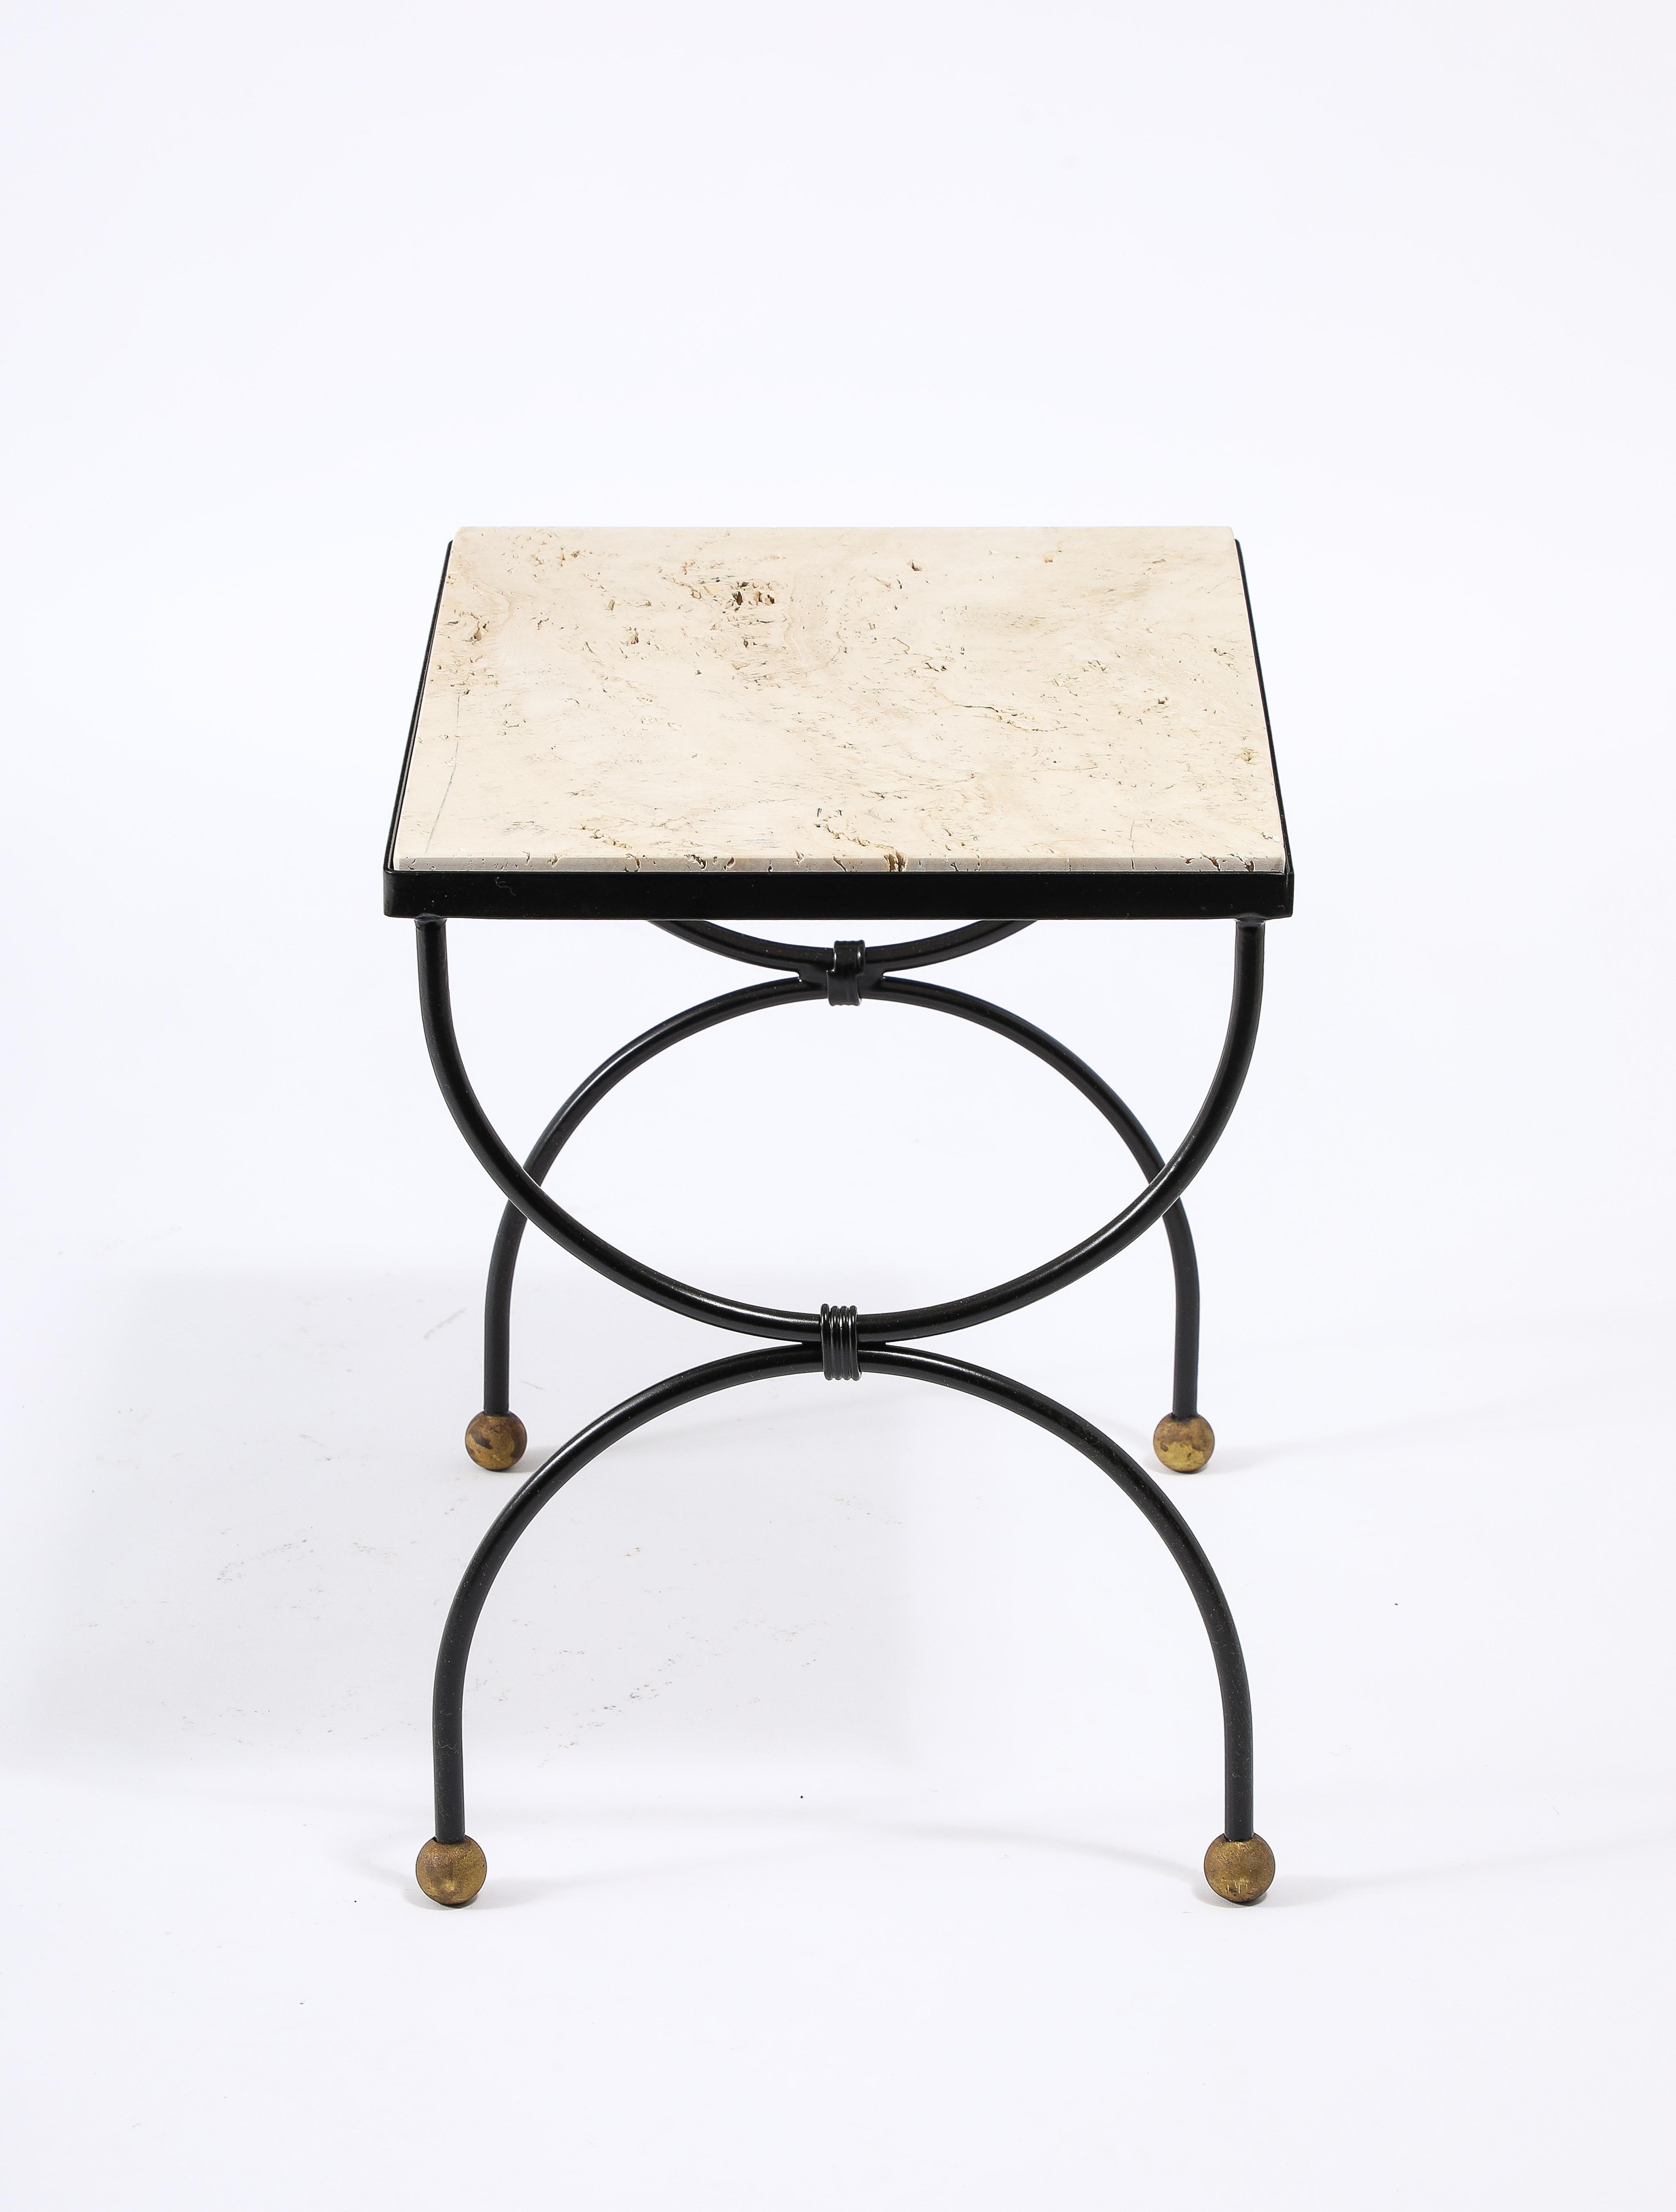 20th Century Small Wrought Iron & Travertine Curule End Table, France 1950's For Sale